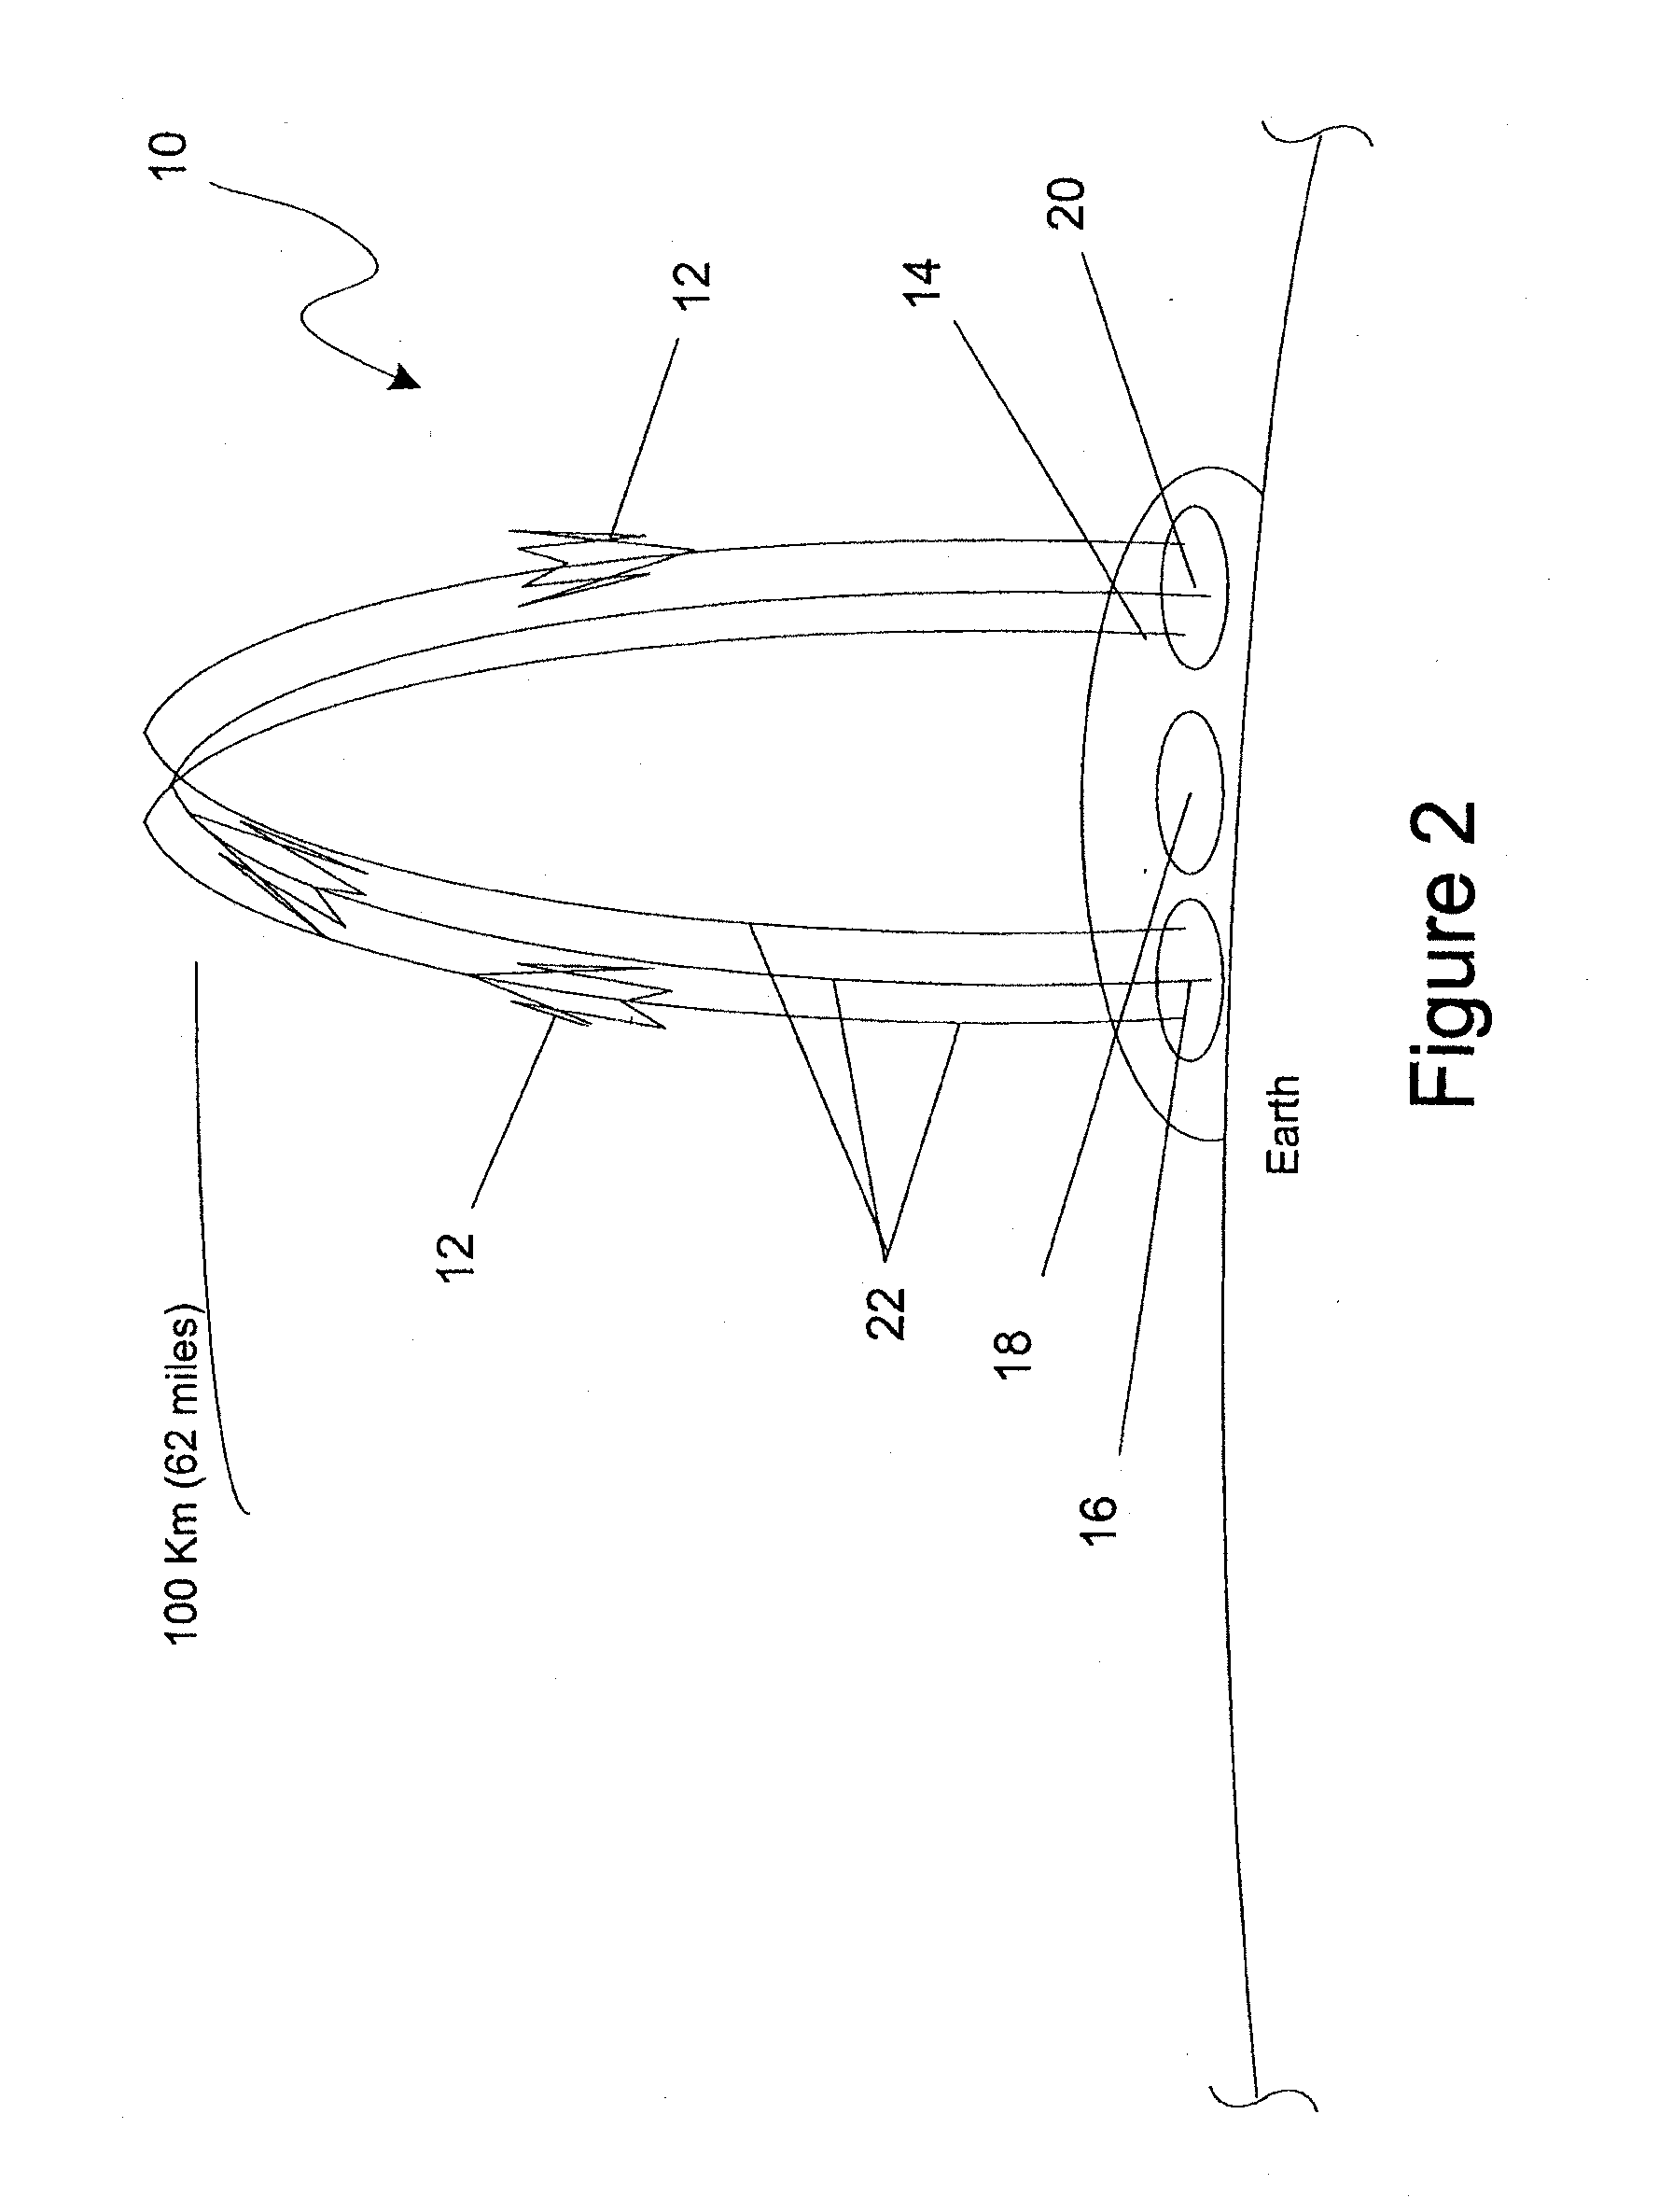 Rocket-powered vehicle racing information system